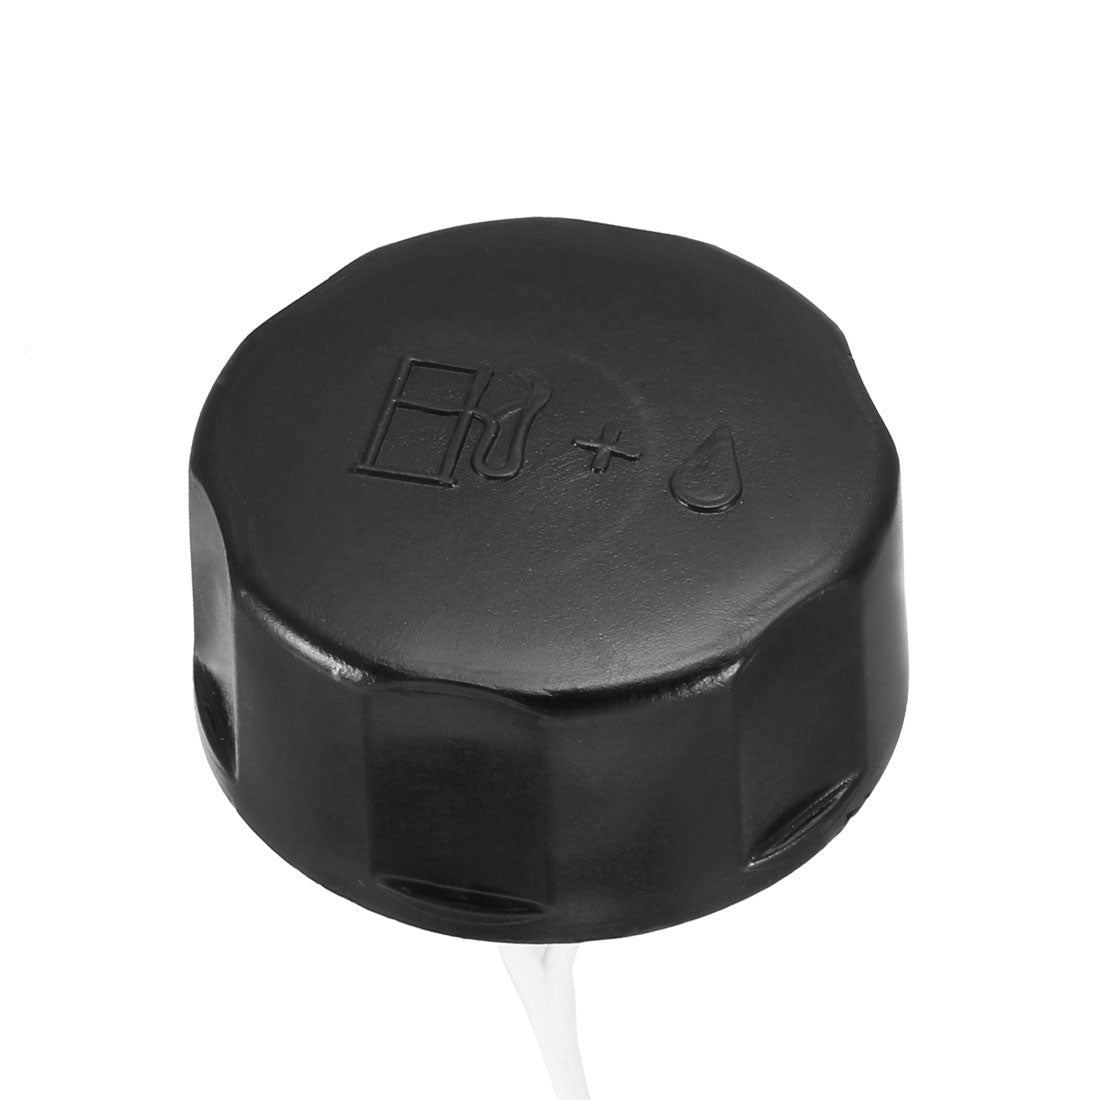 uxcell Uxcell Replace Fuel Tank Cap Fit for GX22 for GX25 for GX35 Lawn Mowers Engine